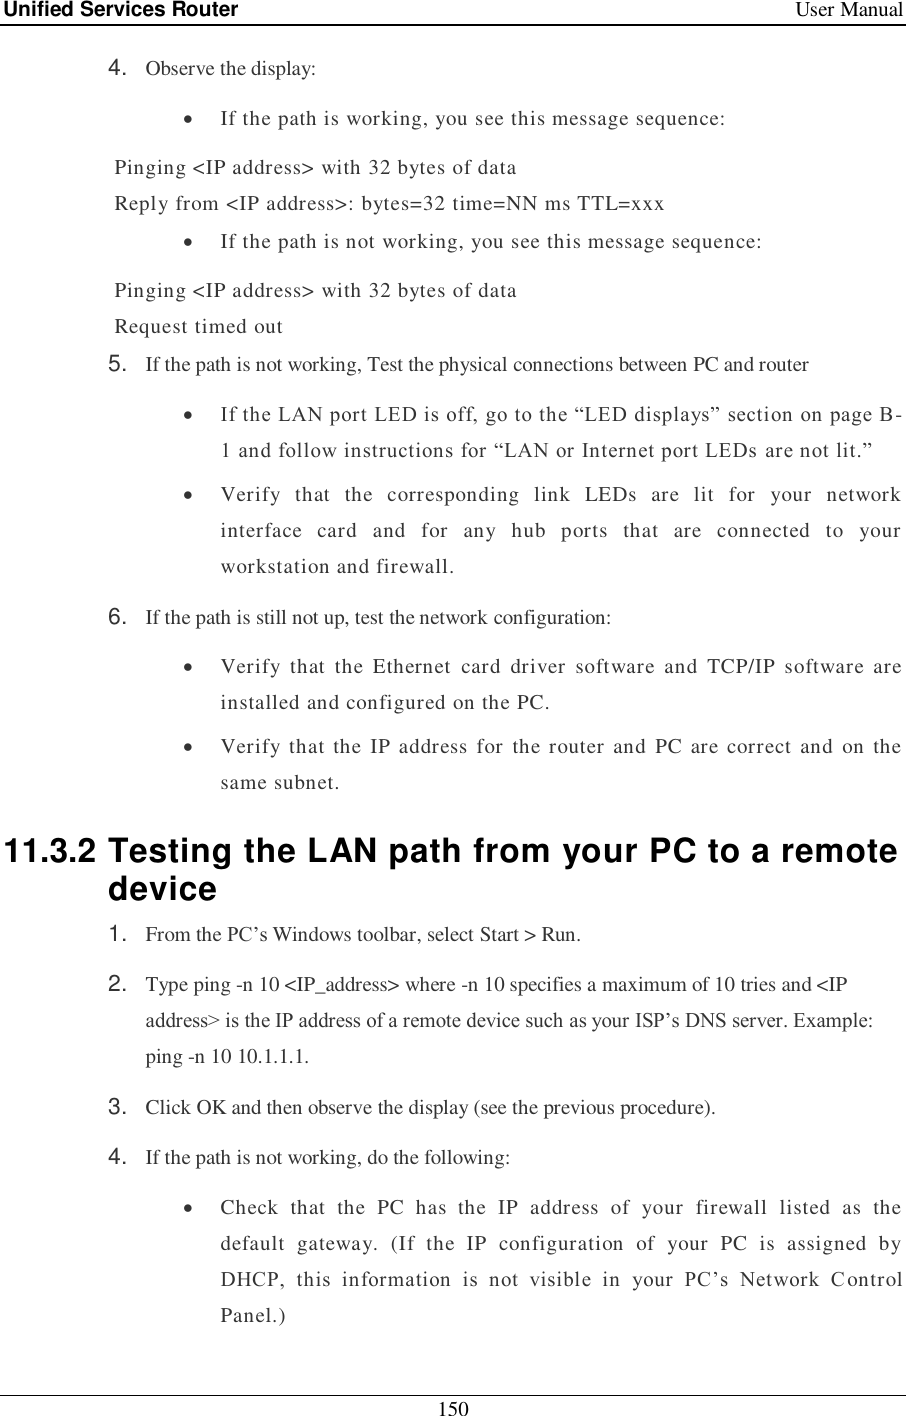 Unified Services Router    User Manual 150  4. Observe the display:  If the path is working, you see this message sequence:  Pinging &lt;IP address&gt; with 32 bytes of data  Reply from &lt;IP address&gt;: bytes=32 time=NN ms TTL=xxx  If the path is not working, you see this message sequence:  Pinging &lt;IP address&gt; with 32 bytes of data  Request timed out 5. If the path is not working, Test the physical connections between PC and router  If the LAN port LED is off, go to the ―LED displays‖ section on page B-1 and follow instructions for ―LAN or Internet port LEDs are not lit.‖  Verify  that  the  corresponding  link  LEDs  are  lit  for  your  network interface  card  and  for  any  hub  ports  that  are  connected  to  your workstation and firewall. 6. If the path is still not up, test the network configuration:  Verify  that  the  Ethernet  card  driver  software  and  TCP/IP  software  are installed and configured on the PC.  Verify  that  the  IP address  for  the router and  PC are correct  and  on  the same subnet. 11.3.2 Testing the LAN path from your PC to a remote device 1. From the PC‘s Windows toolbar, select Start &gt; Run. 2. Type ping -n 10 &lt;IP_address&gt; where -n 10 specifies a maximum of 10 tries and &lt;IP address&gt; is the IP address of a remote device such as your ISP‘s DNS server. Example: ping -n 10 10.1.1.1. 3. Click OK and then observe the display (see the previous procedure). 4. If the path is not working, do the following:  Check  that  the  PC  has  the  IP  address  of  your  firewall  listed  as  the default  gateway.  (If  the  IP  configuration  of  your  PC  is  assigned  by DHCP,  this  information  is  not  visible  in  your  PC‘s  Network  C ontrol Panel.) 